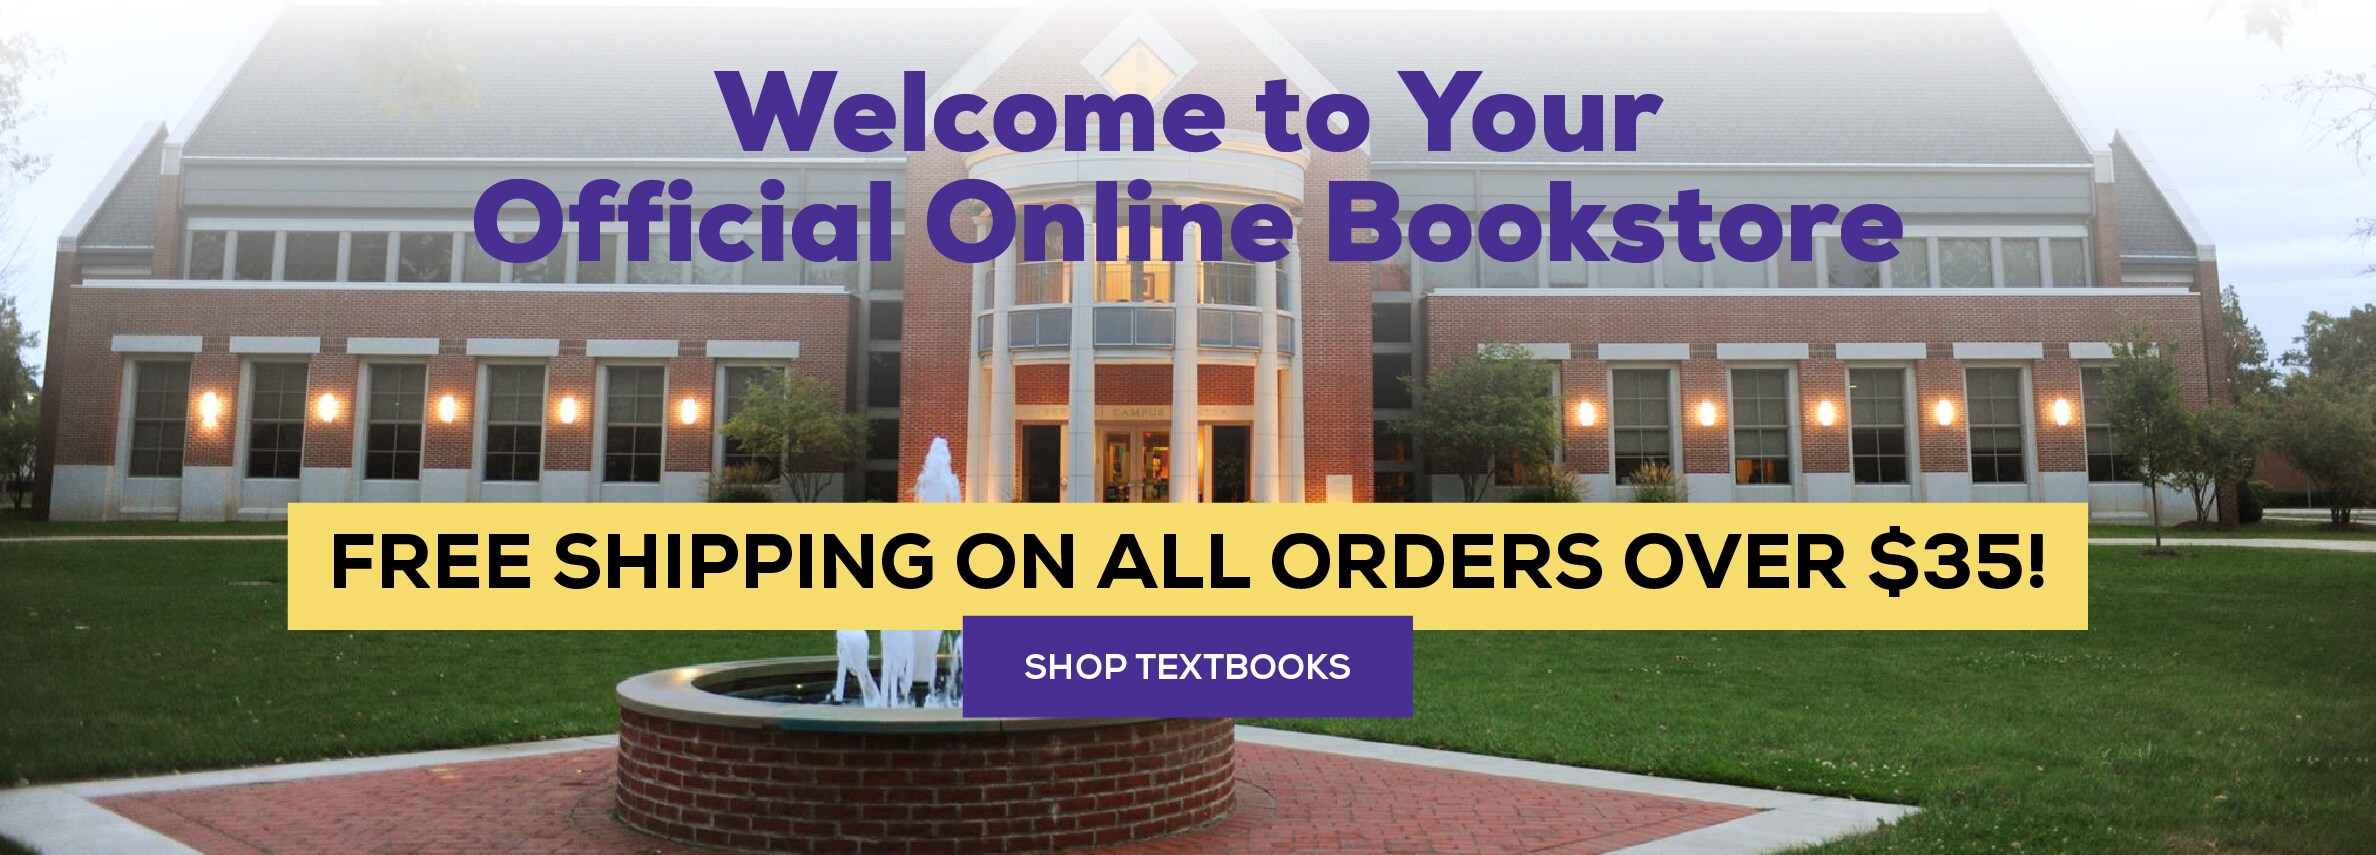 Welcome to your official online bookstore. Free shipping on all orders over $35!